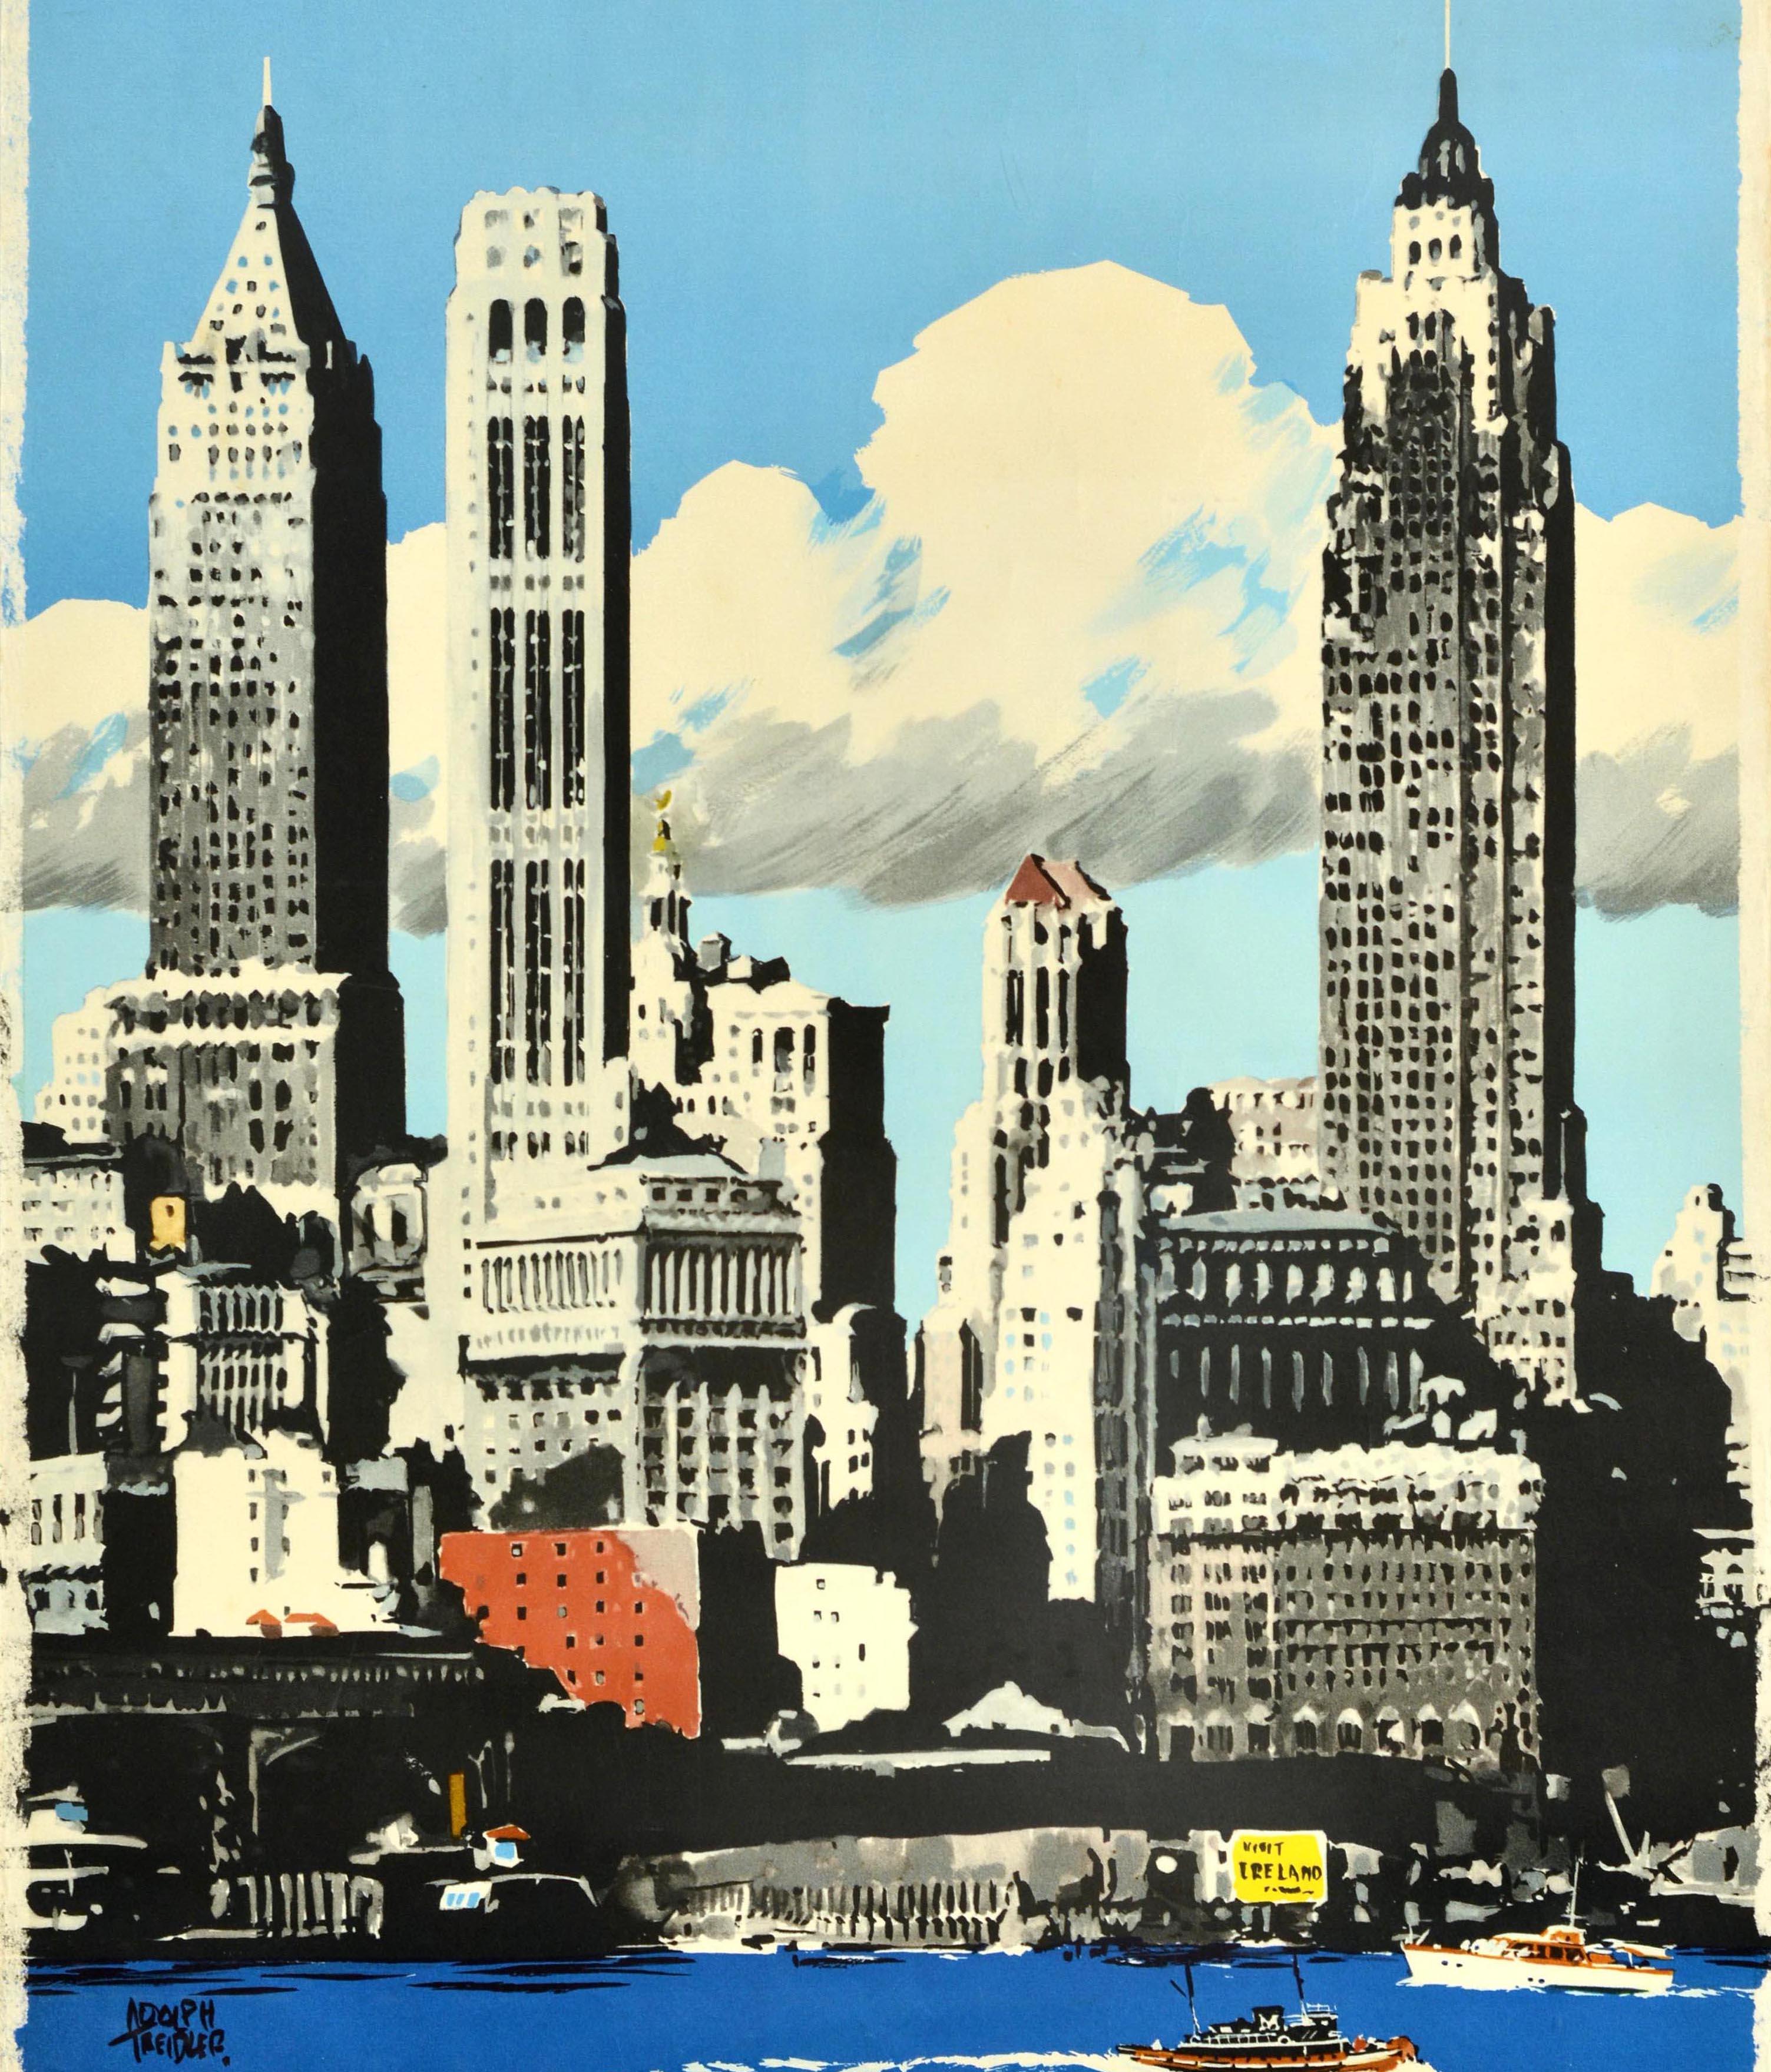 Original vintage travel advertising poster for the USA by Aer Lingus Irish International Airlines featuring an illustration of New York skyscrapers rising into the blue sky with boats on the water and the Aer Lingus shamrock logo and text below.